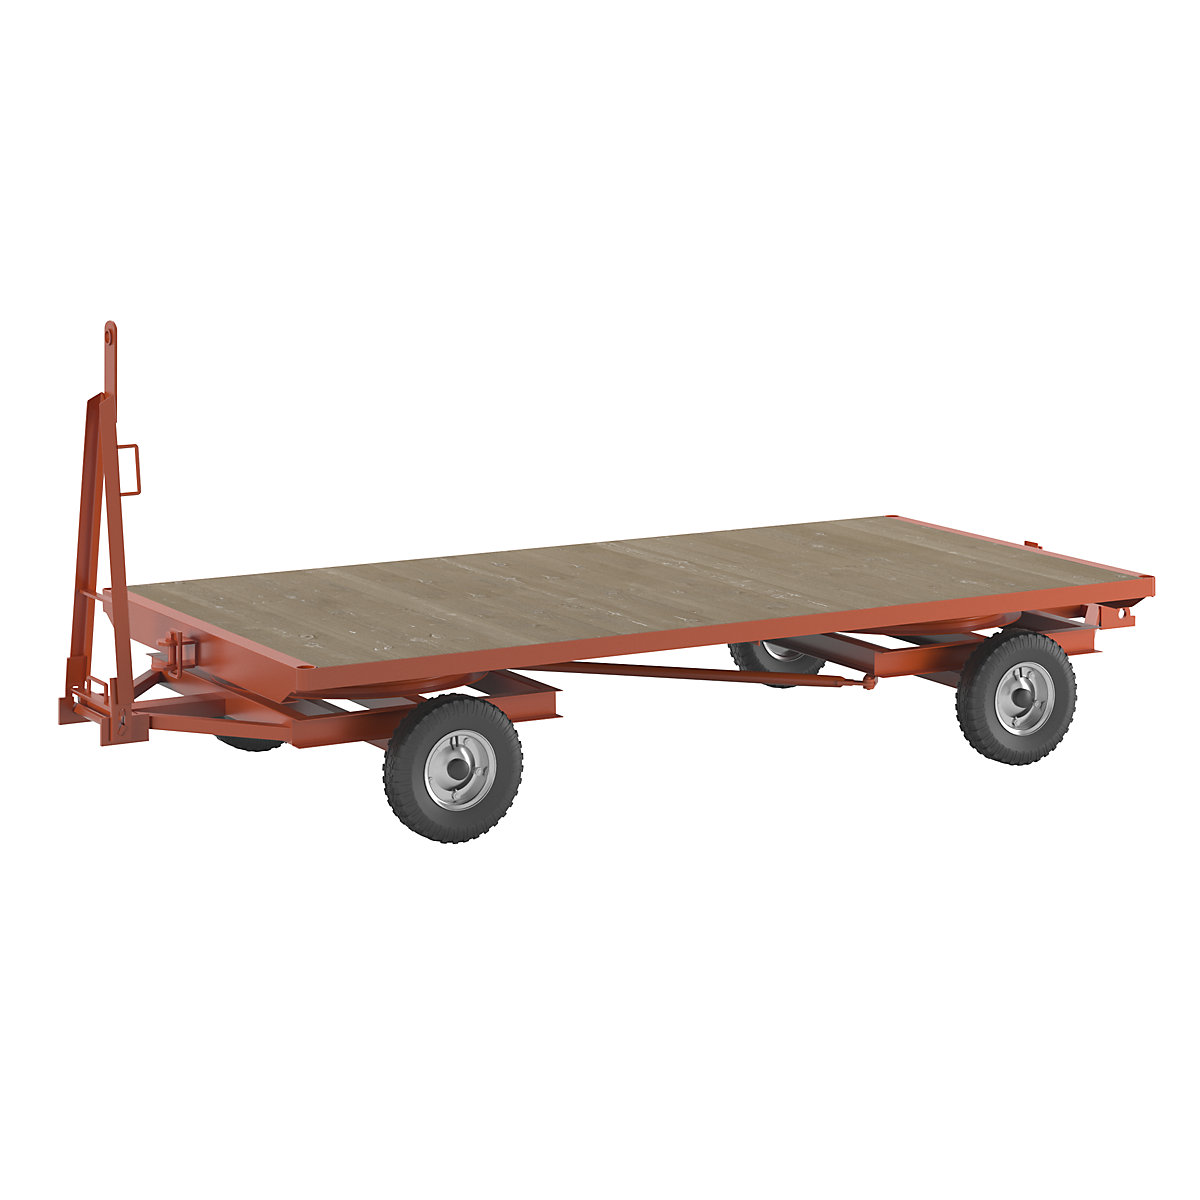 Trailer, 4-wheel double turntable steering, max. load 3 t, platform 3.0 x 1.5 m, pneumatic tyres-19